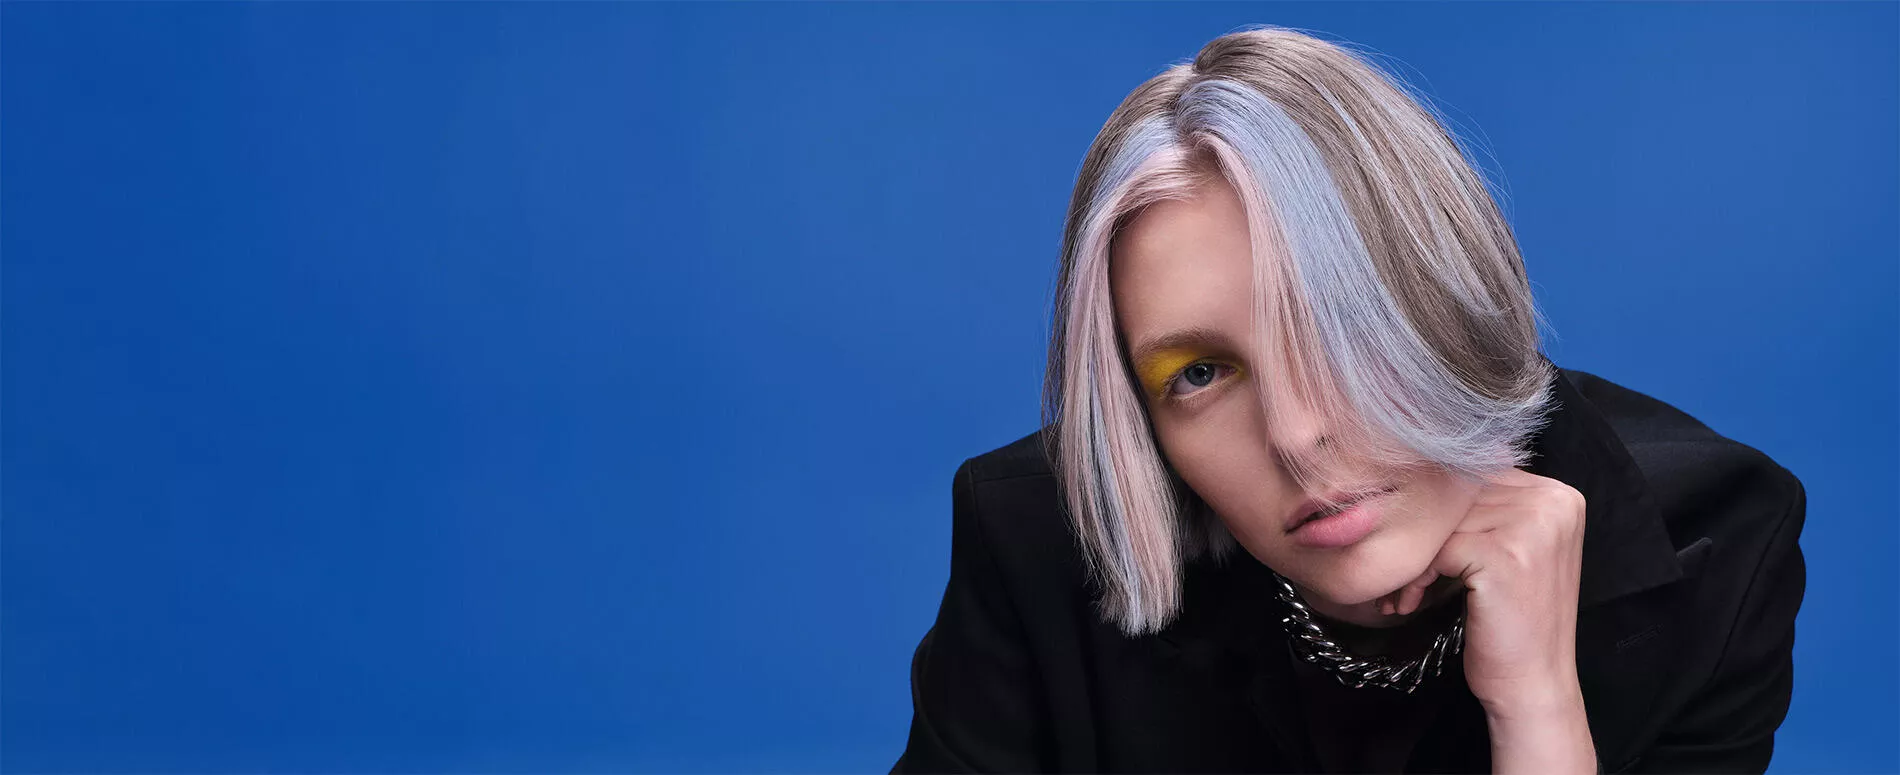 Blonde model wit light blue locks, with blocked face frame color service, in front of a blue background